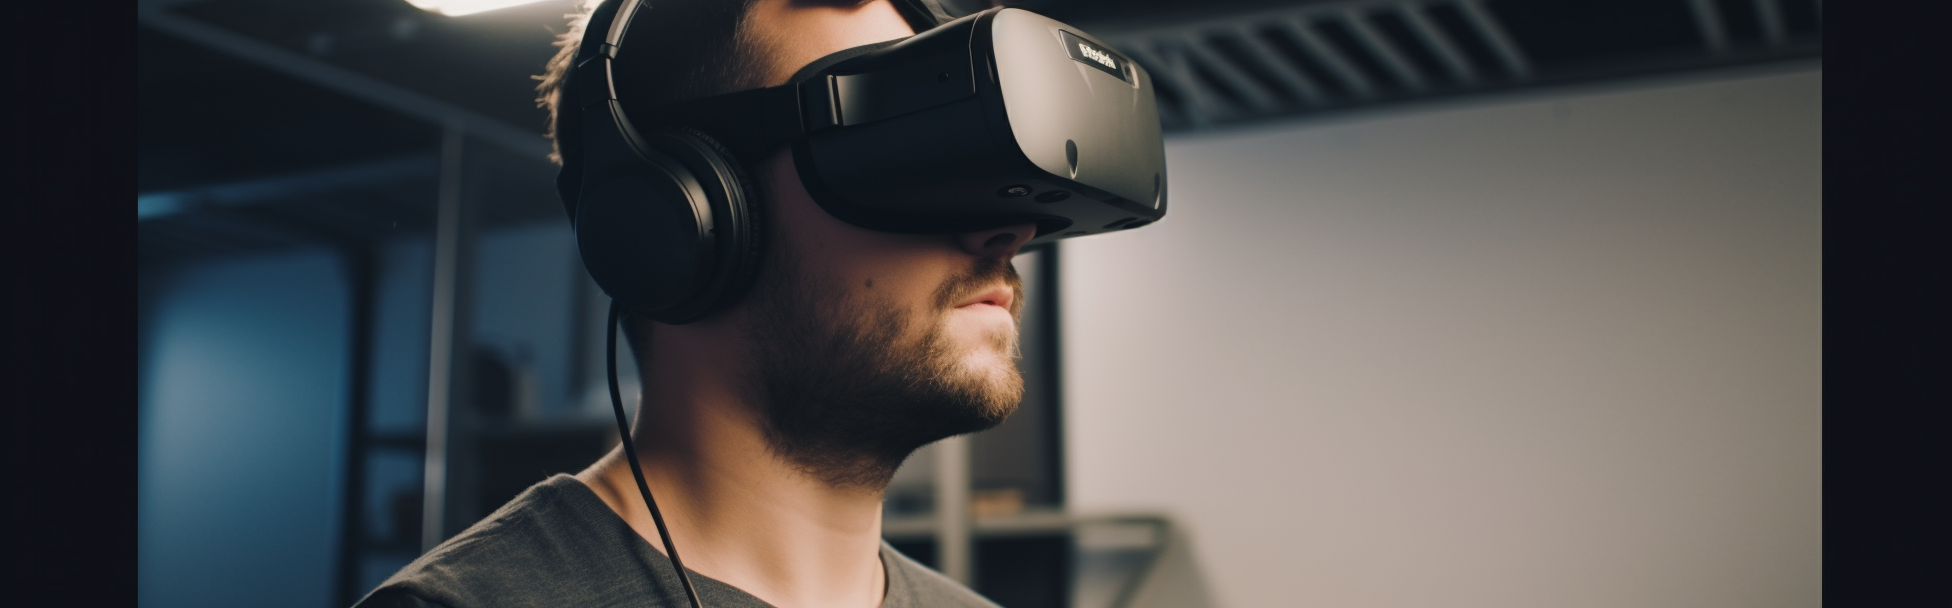 Immersive Technologies and Gaming